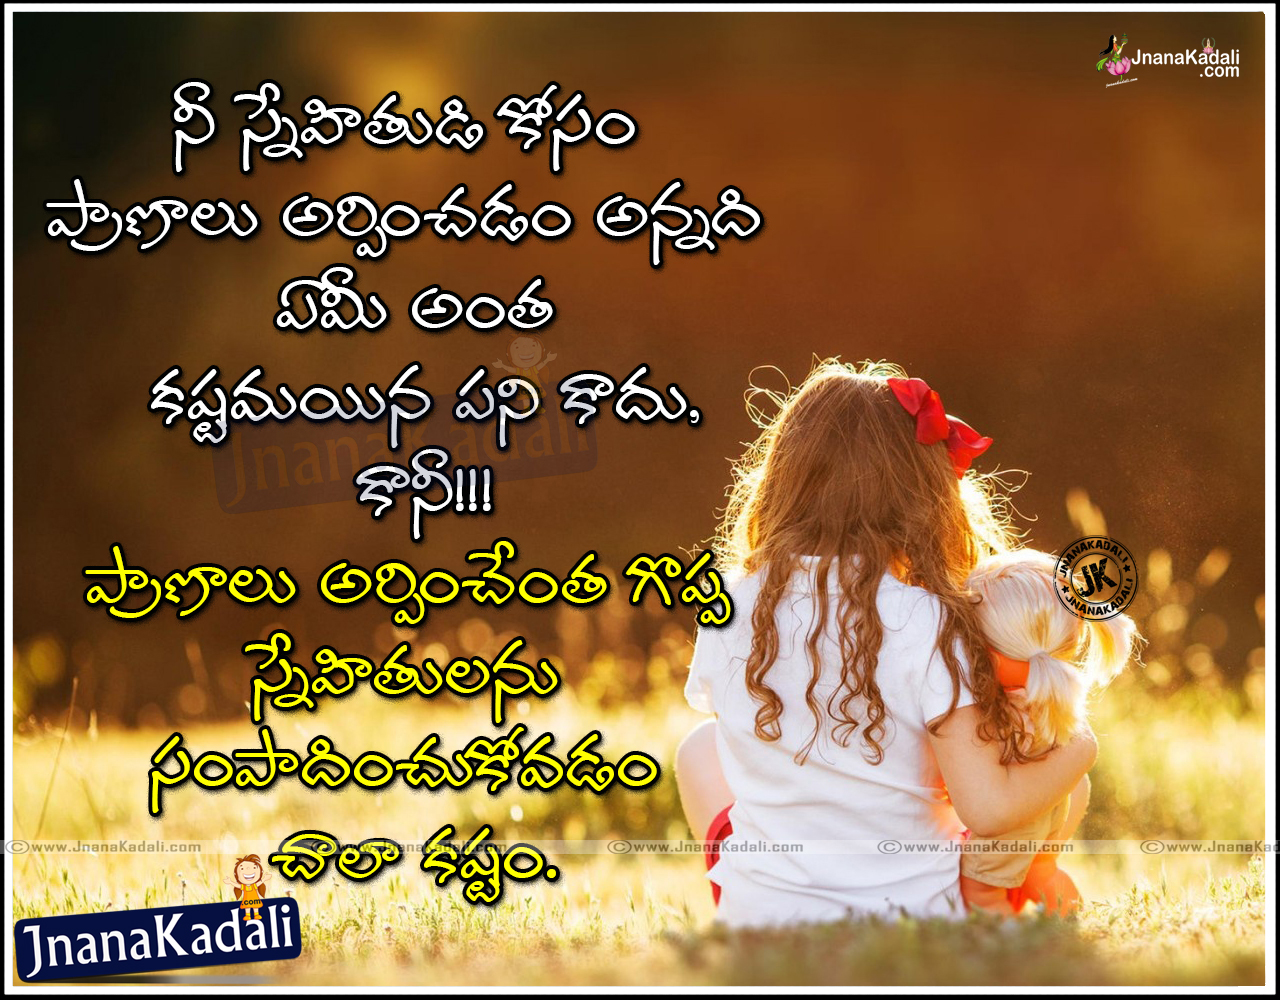 Friendship Quotes, wallpapers/facebook cover photos in Telugu ...